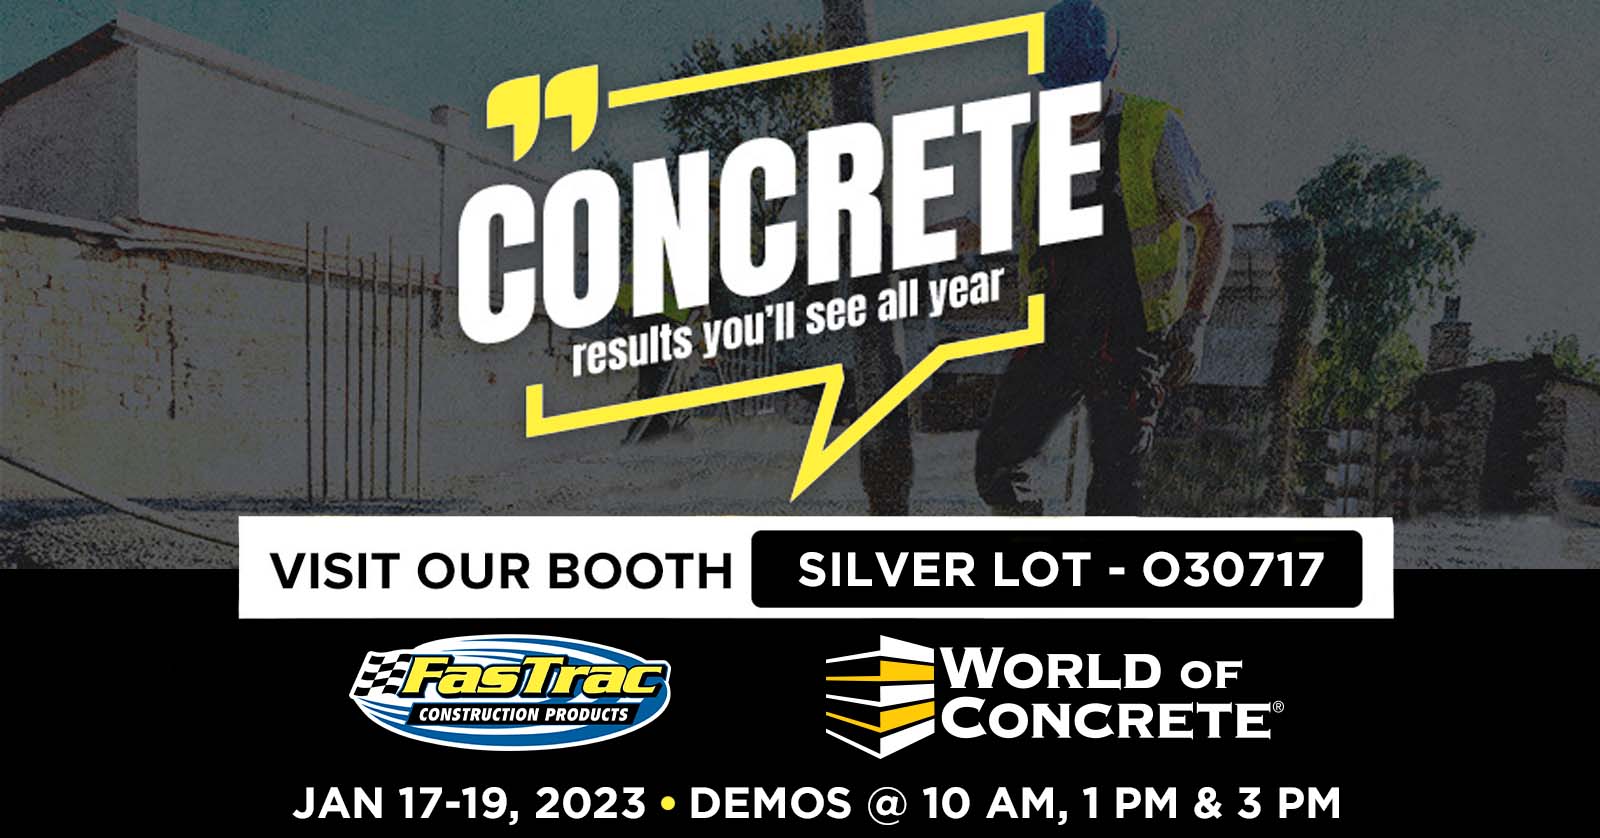 FasTrac returns to World of Concrete 2023 with Exciting New Demos